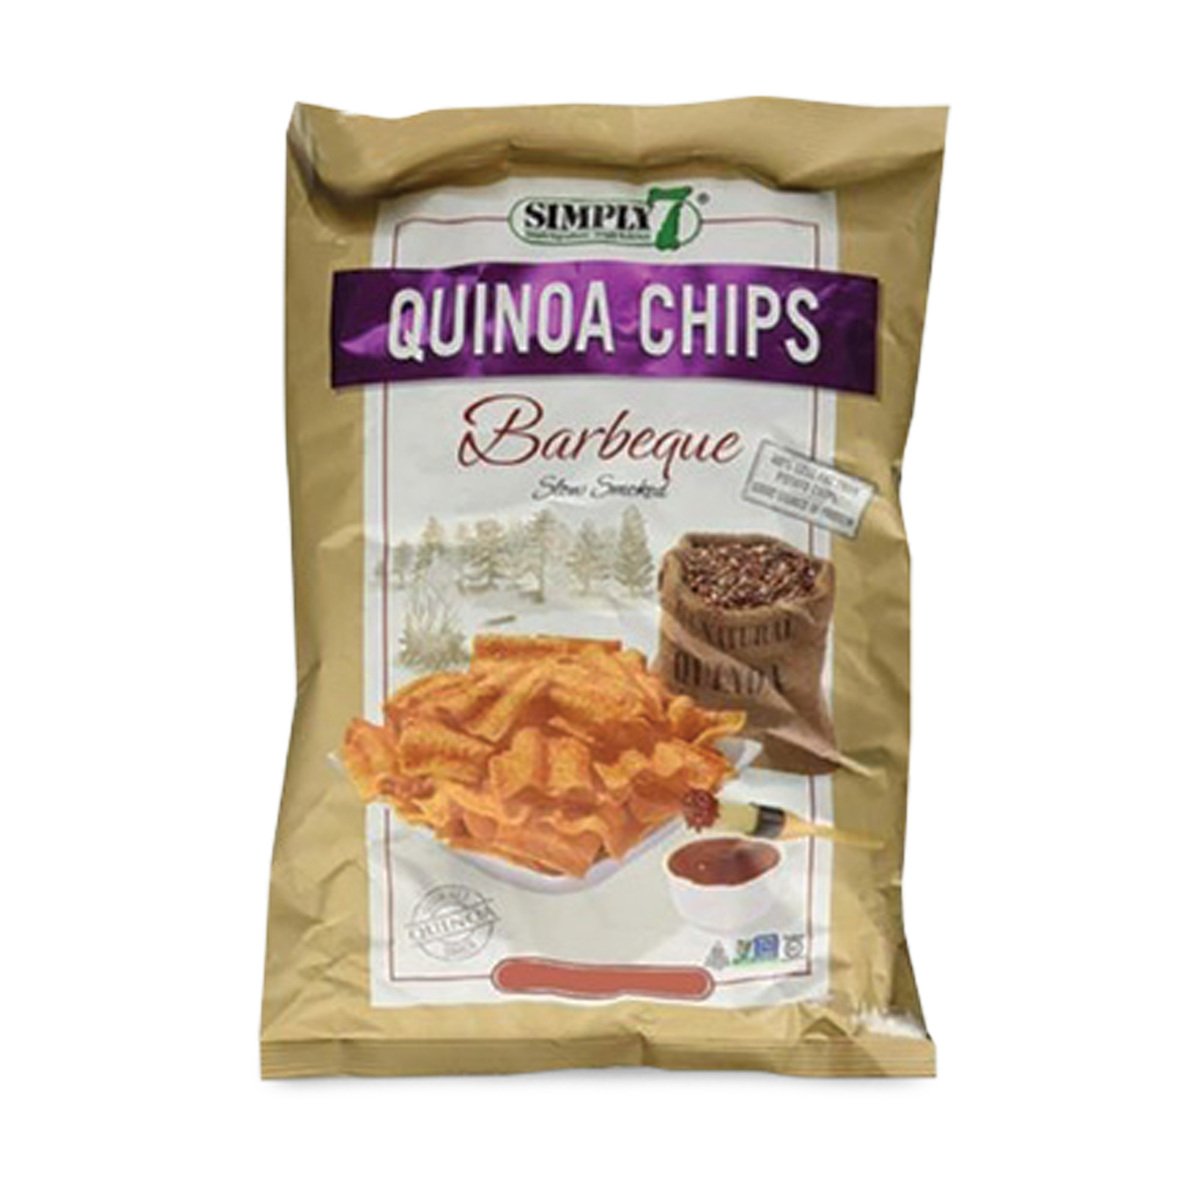 Simply 7 Quinoa Chips Barbeque 79 g